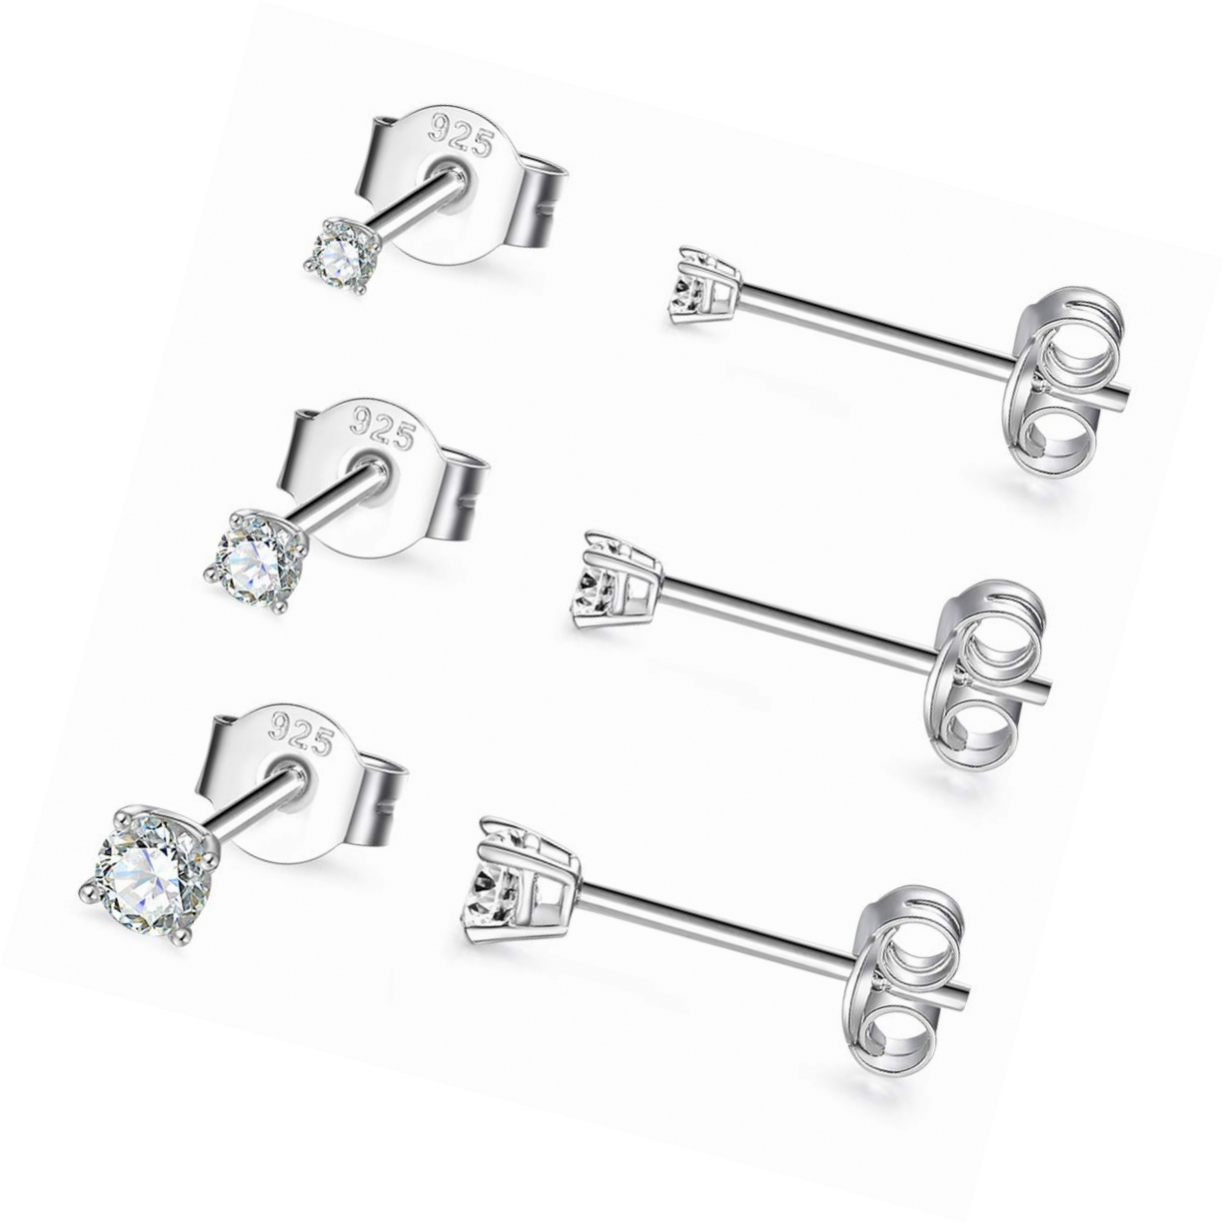 Sterling Silver Stud Earrings 3 Pairs Tiny  Round CZ Cubic Zirconia Pearl Set